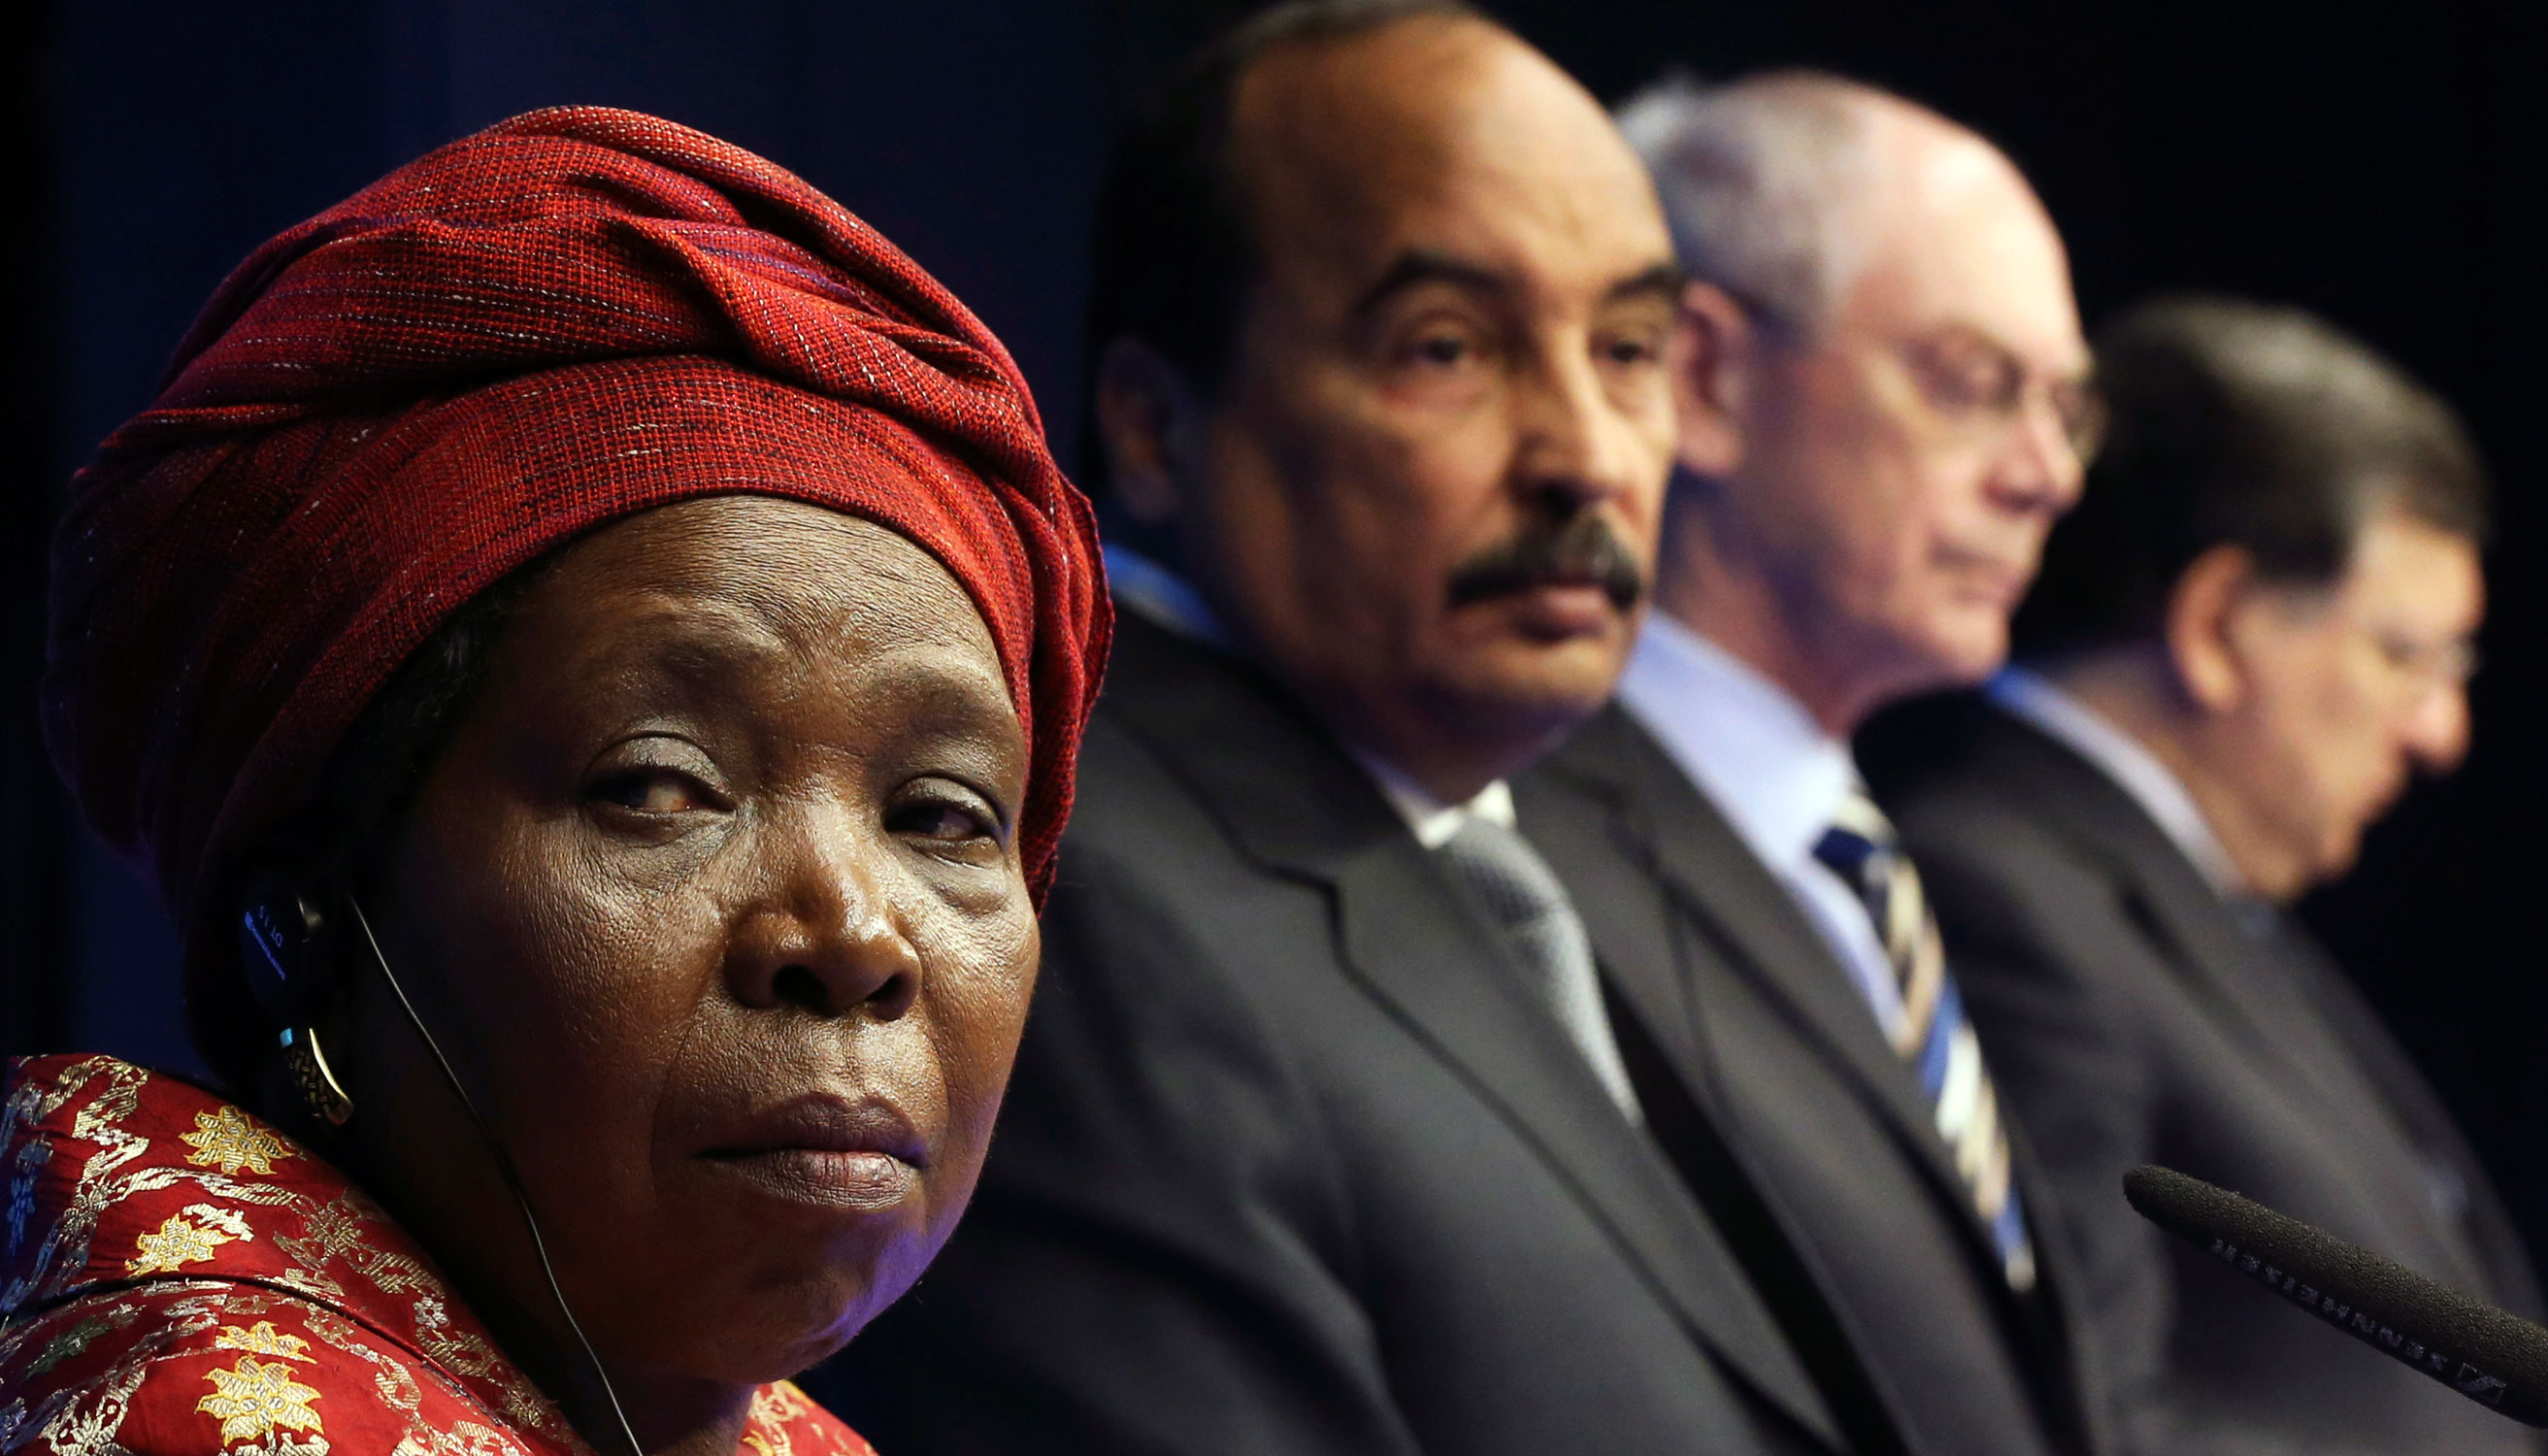 Press conference with members of the African and European Union in Brussels